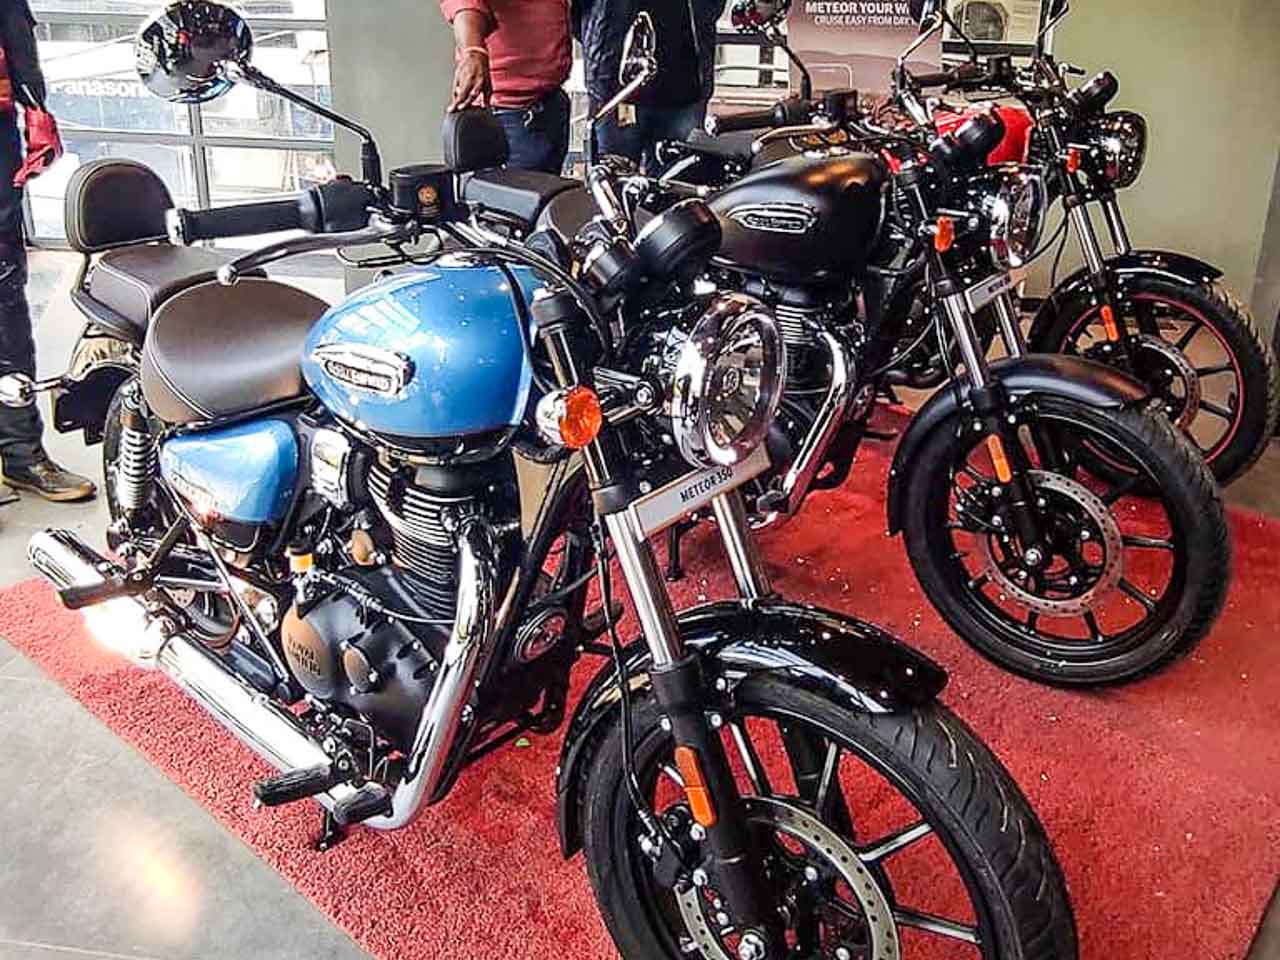 350cc Motorcycle Sales March 2021 - Classic, Meteor, Bullet, Hness CB350